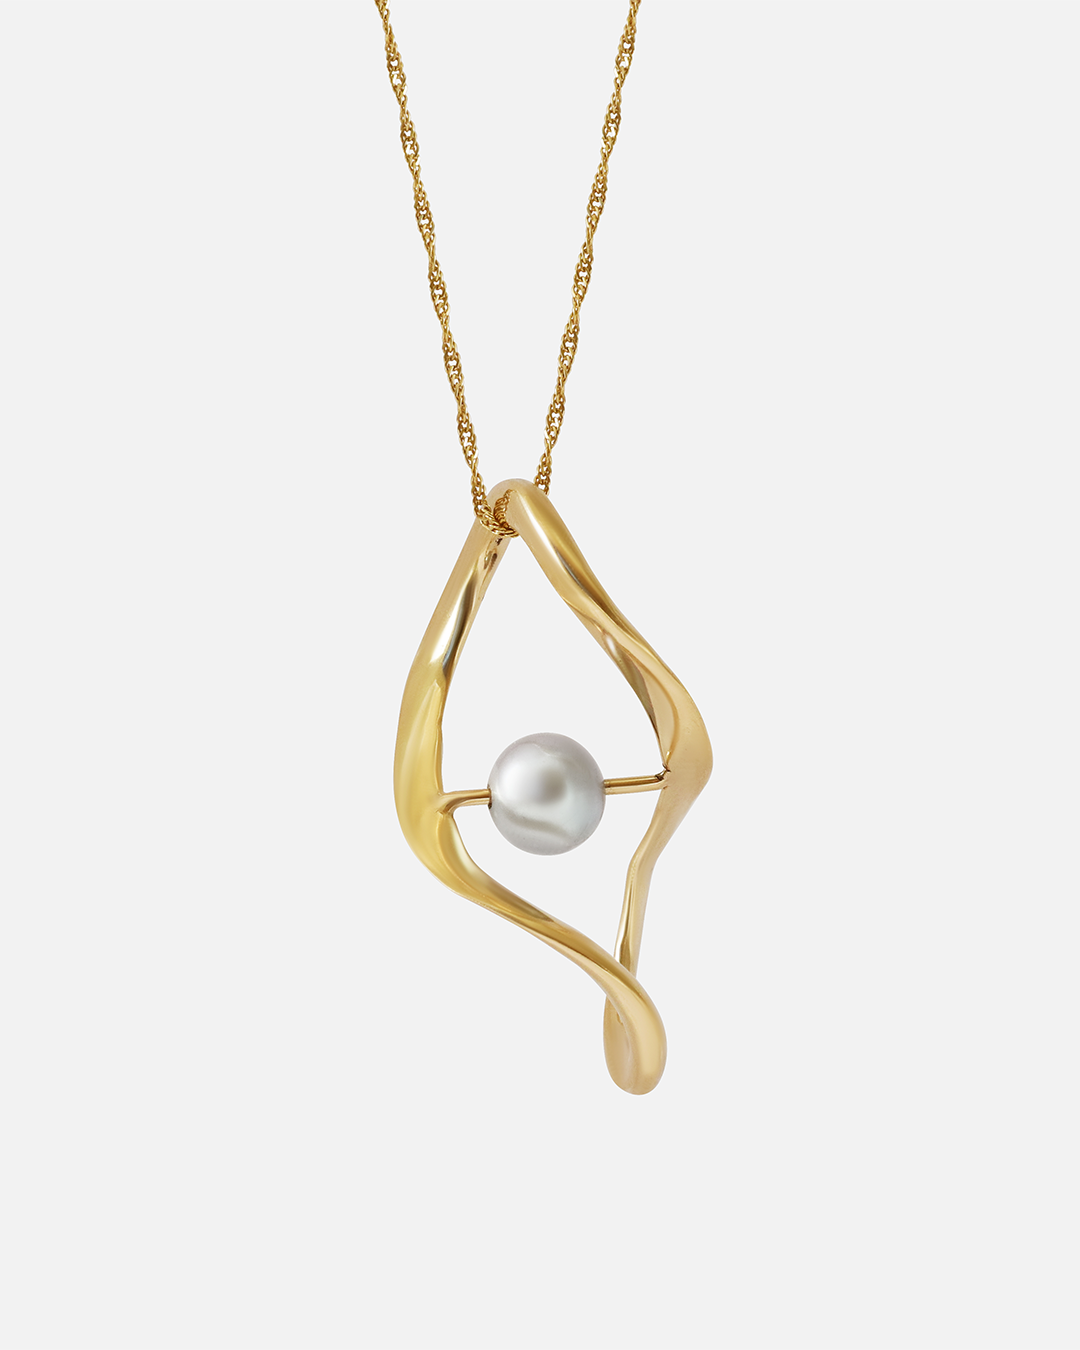 Helix Necklace By Lucia B Marti in pendants Category